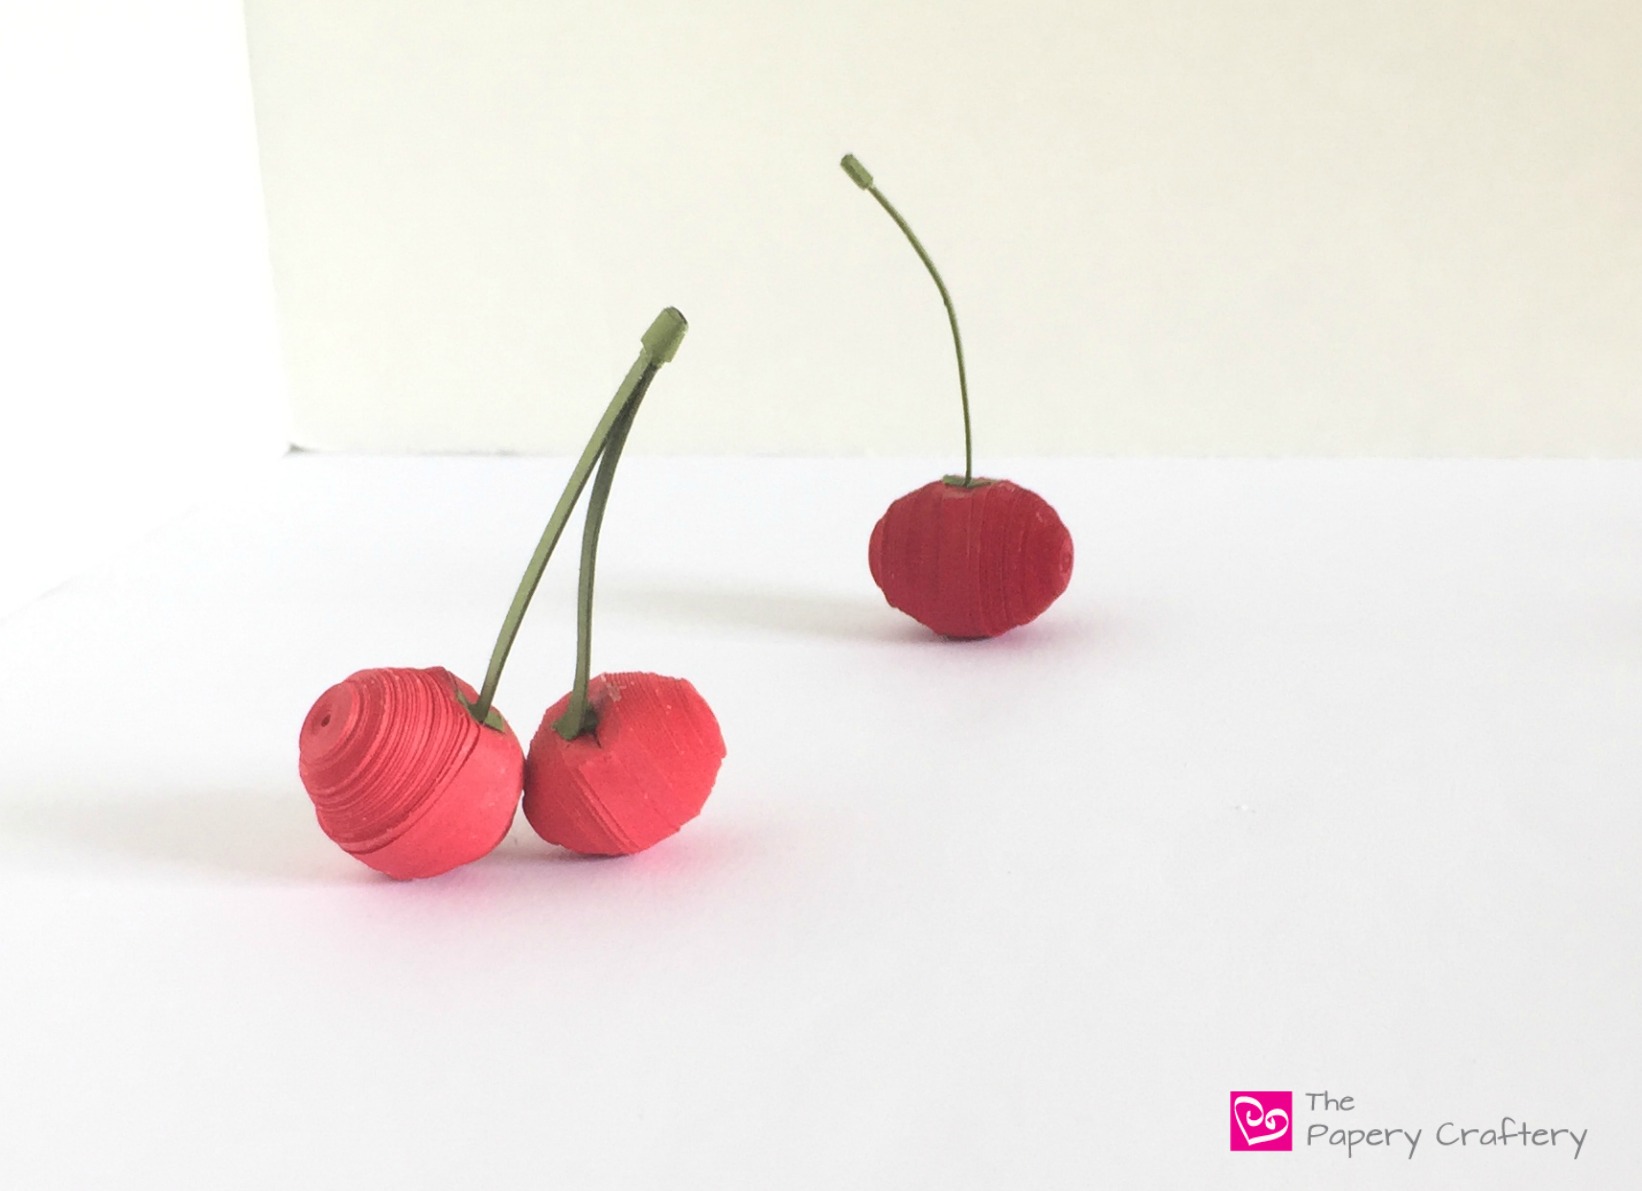 https://www.thepaperycraftery.com/wp-content/uploads/2017/05/Steps-to-Making-Quilling-Paper-Cherries-www.thepaperycraftery.com_.jpg